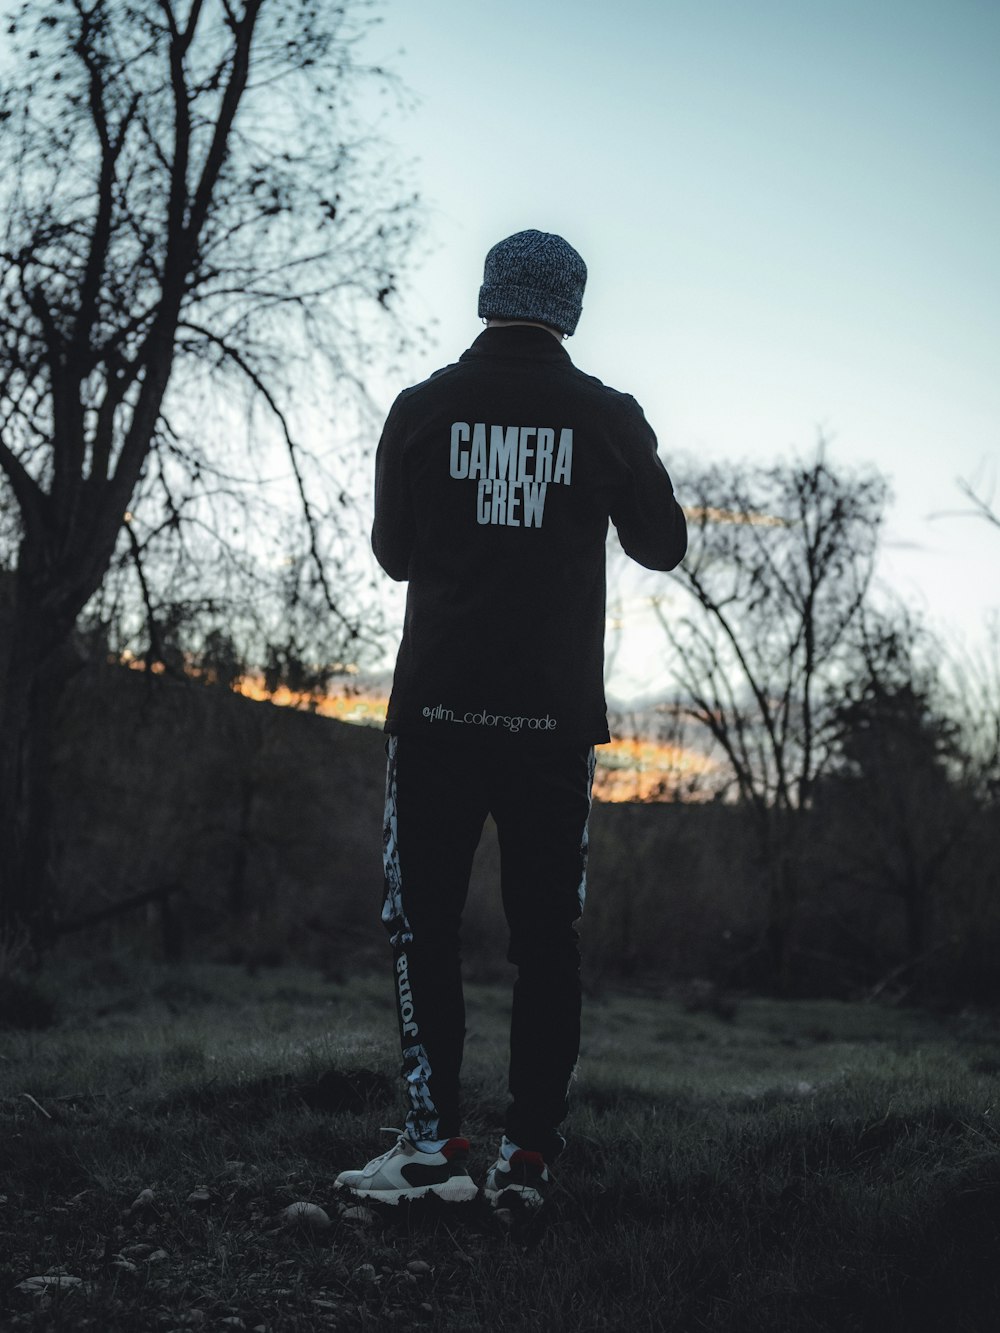 Man in black hoodie standing on green grass field during daytime photo –  Free Lumix g Image on Unsplash